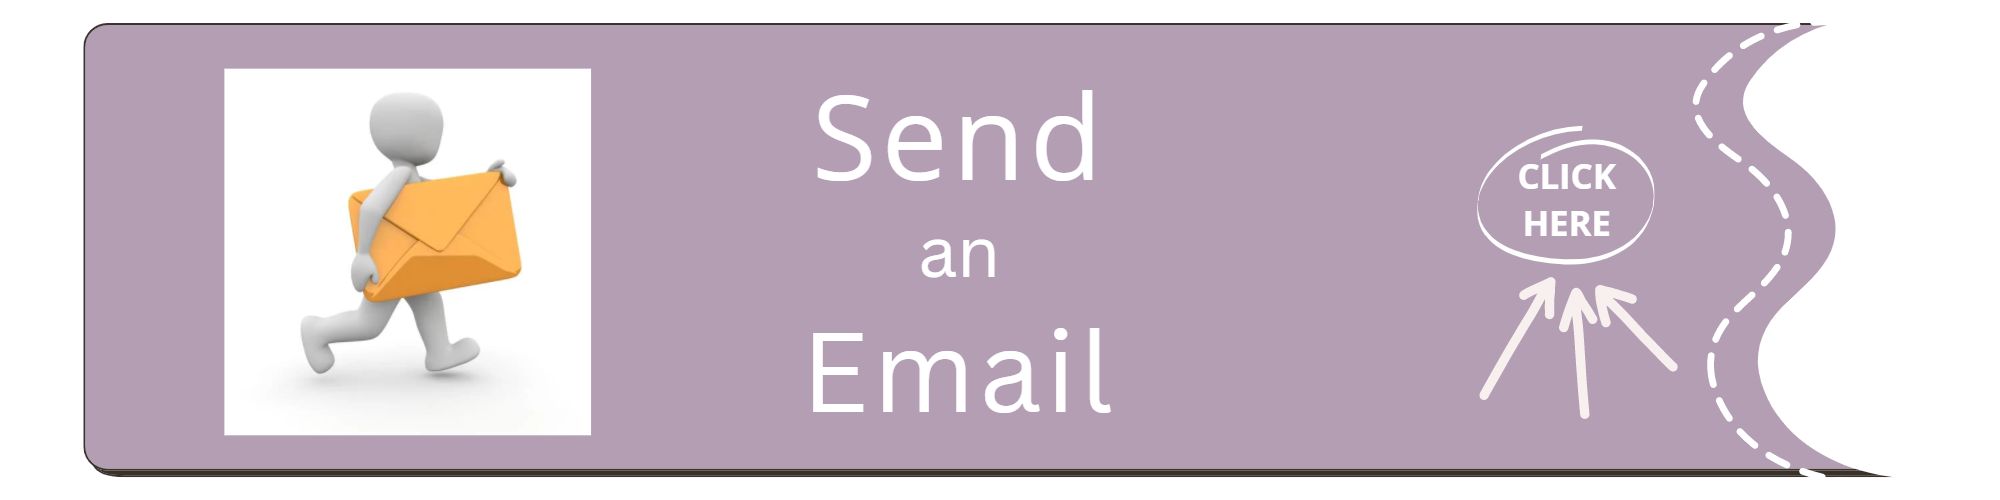 end an email